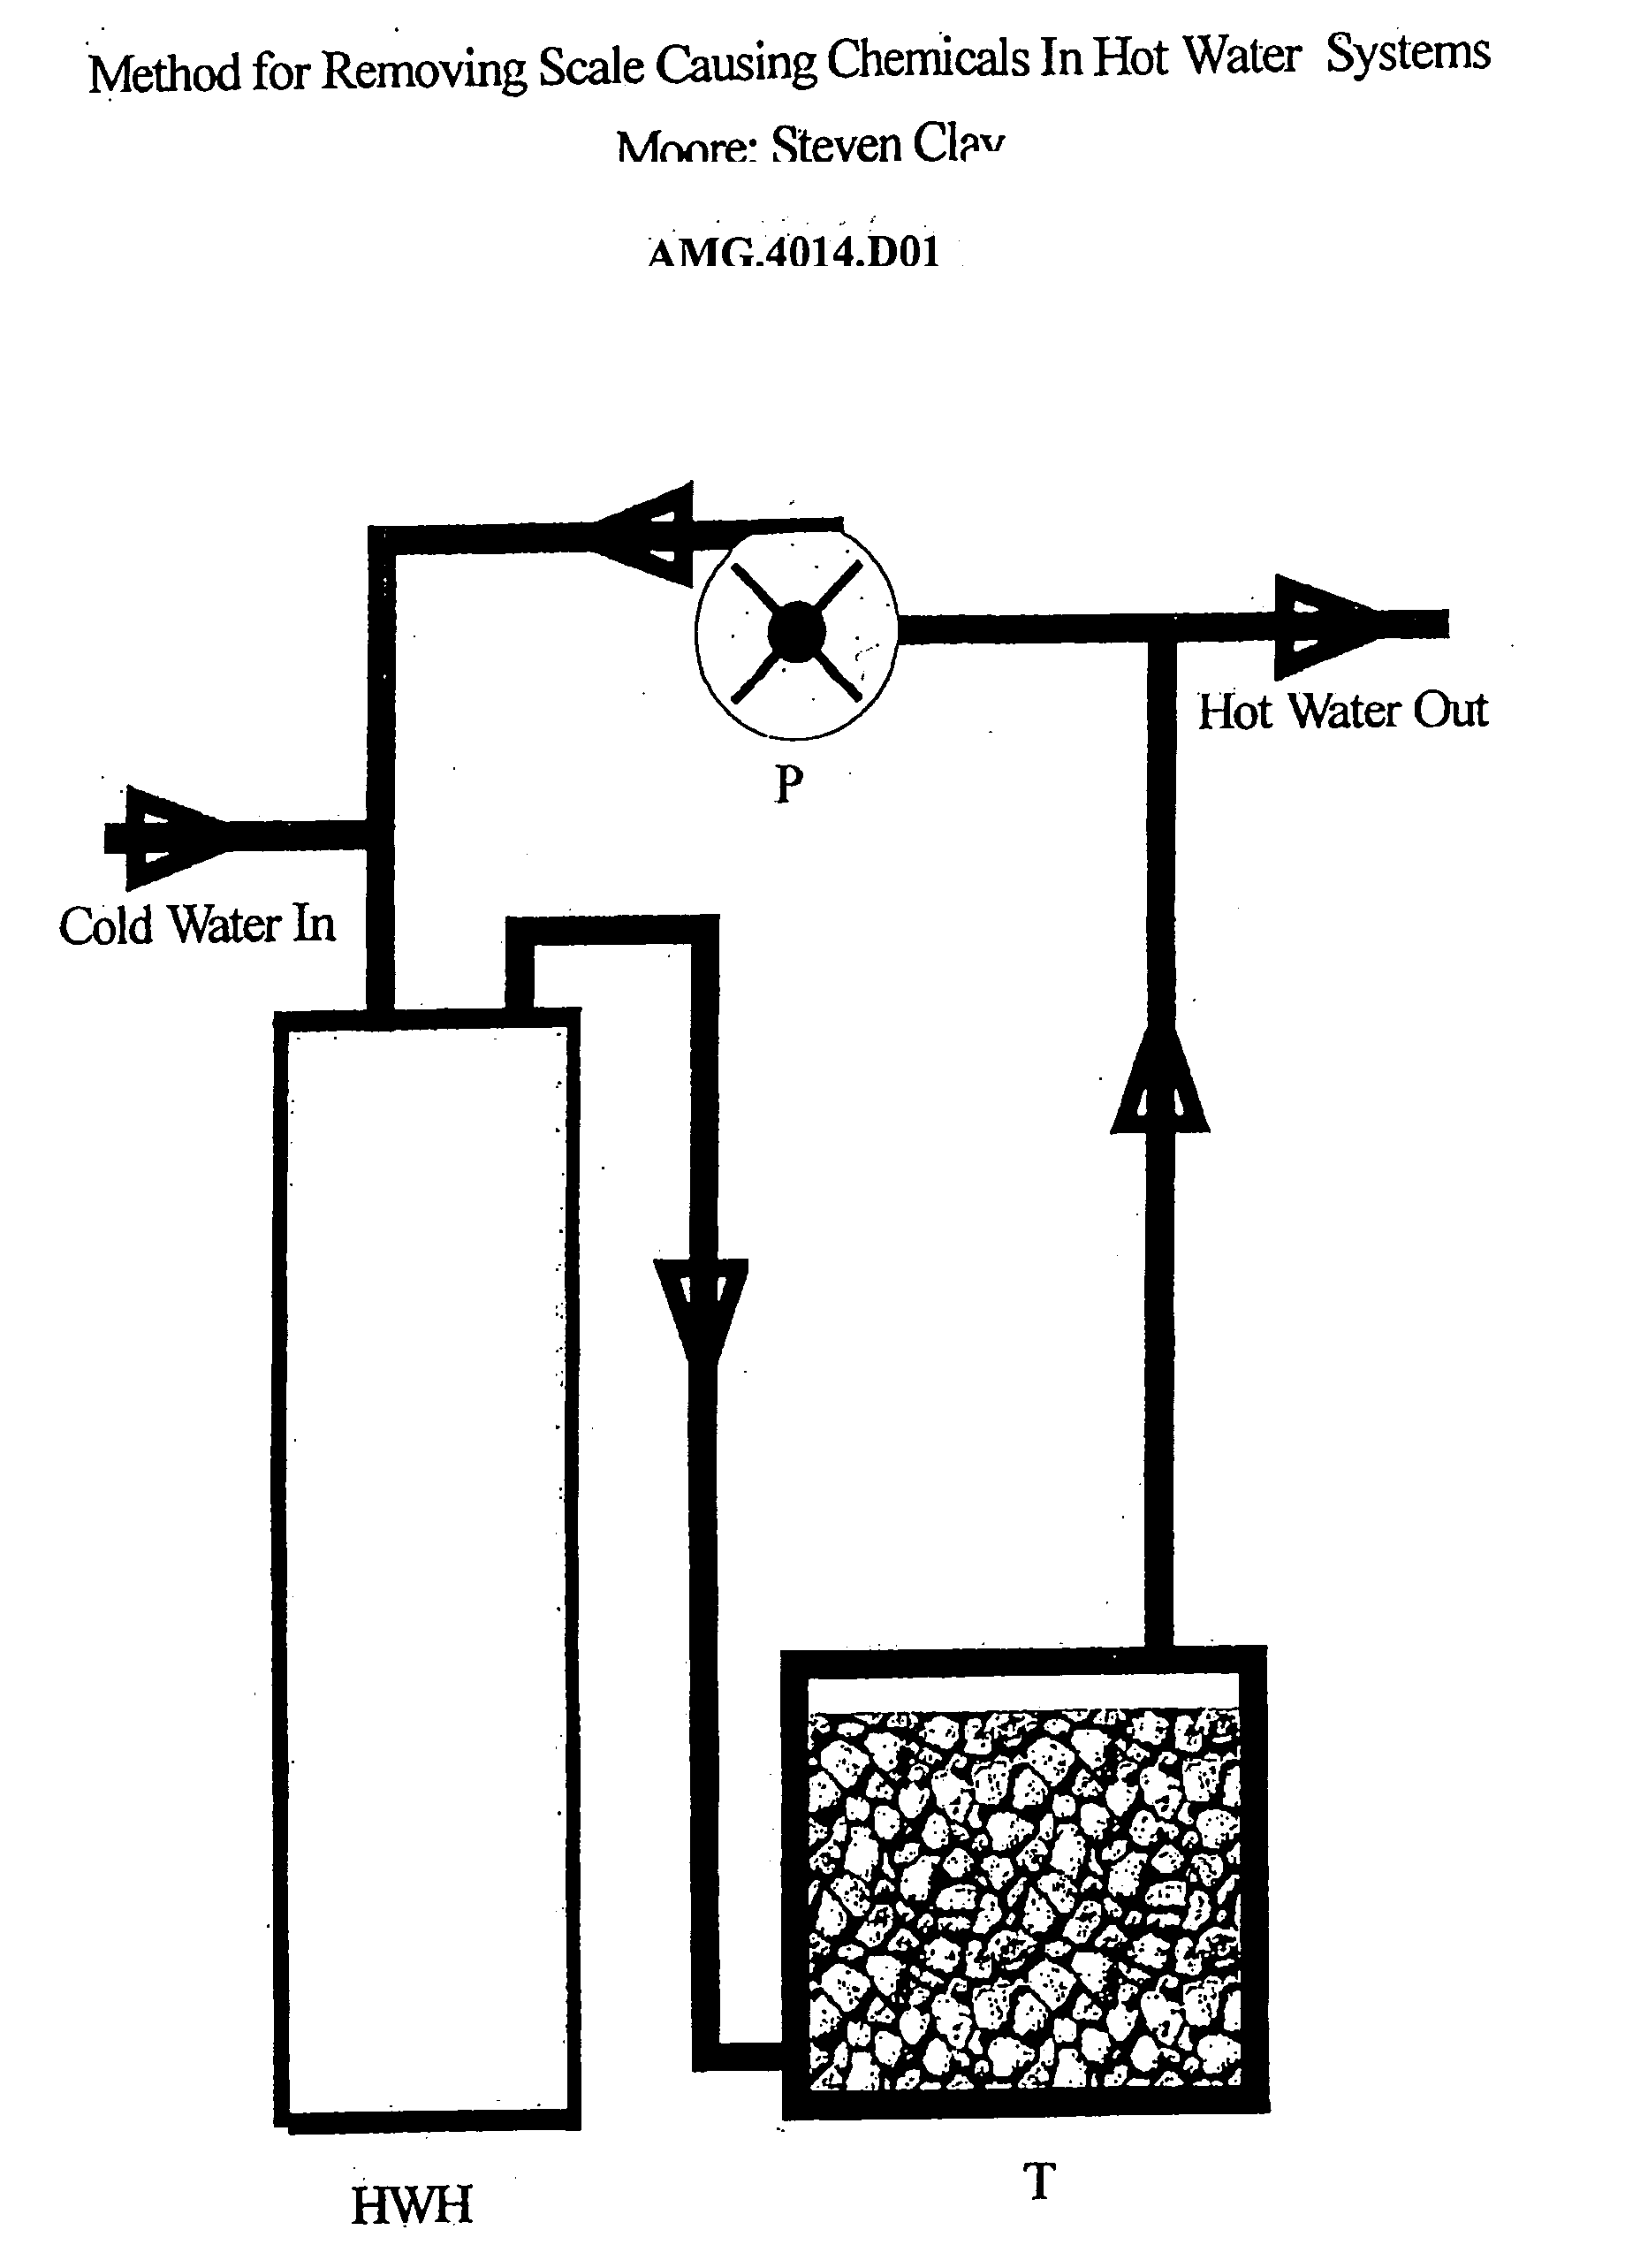 Method for removing scale causing chemicals in hot water systems